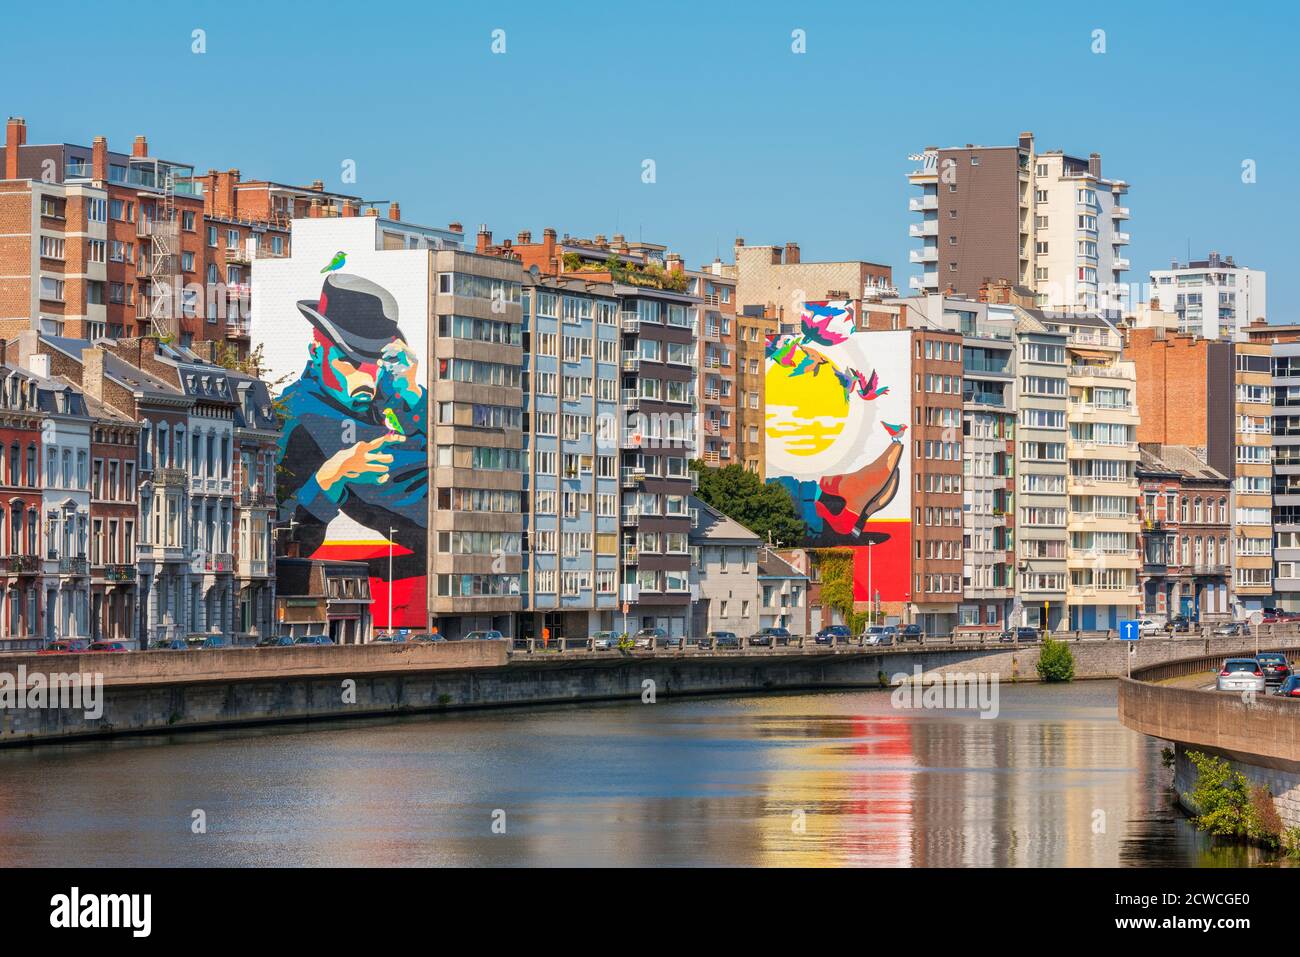 Giant diptych Murals on walls along the Meuse River in Liège, Wallonia, Belgium Stock Photo